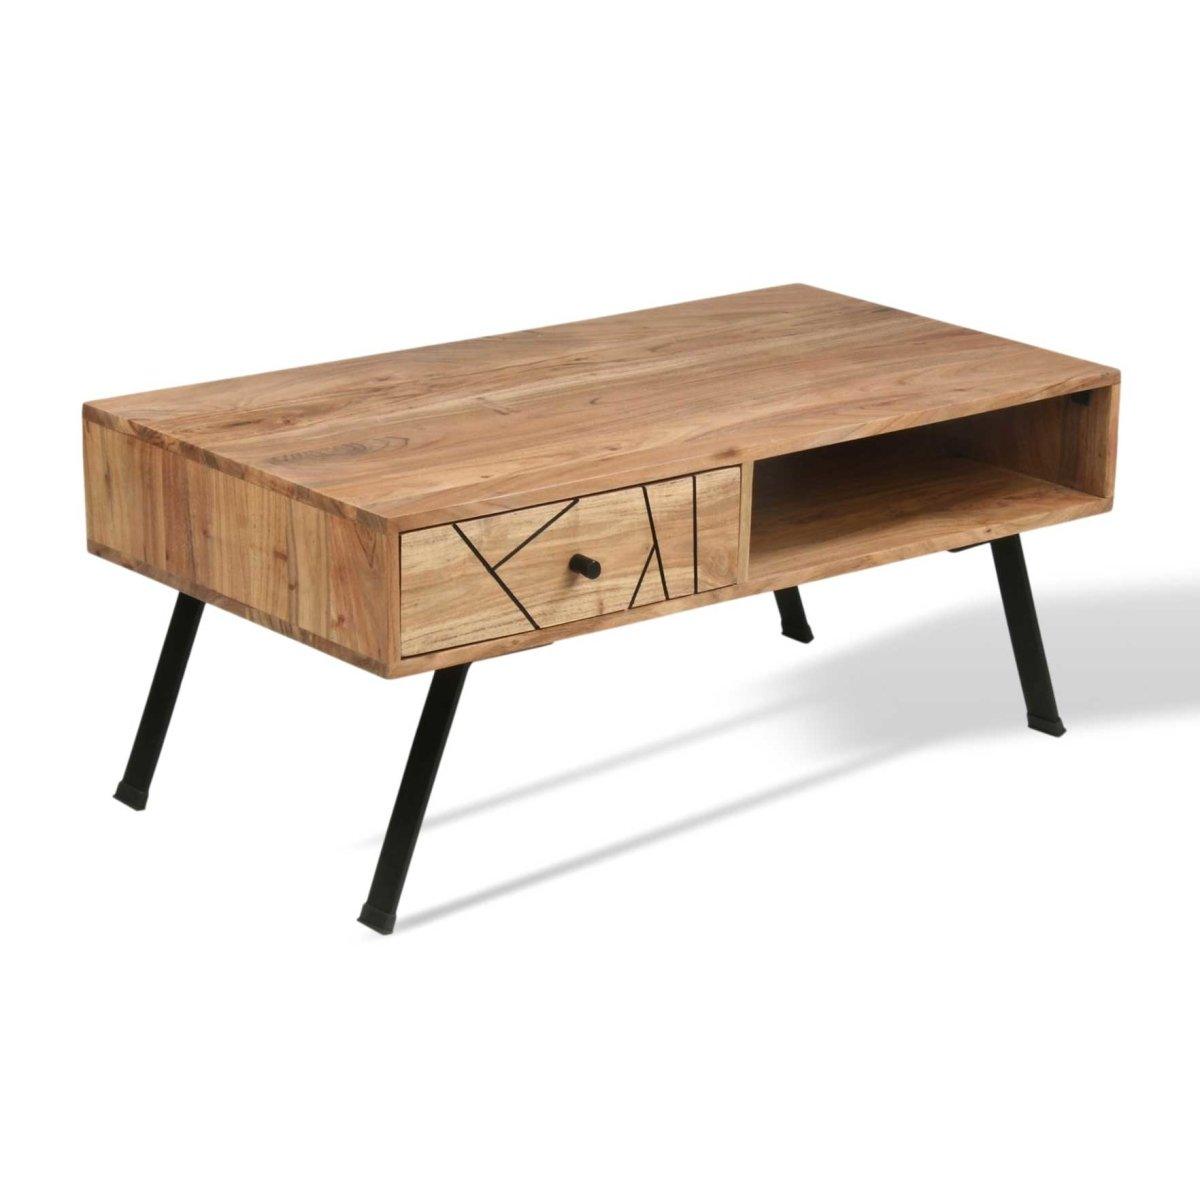 Scott Acacia wood Coffee Table - Rustic Furniture Outlet